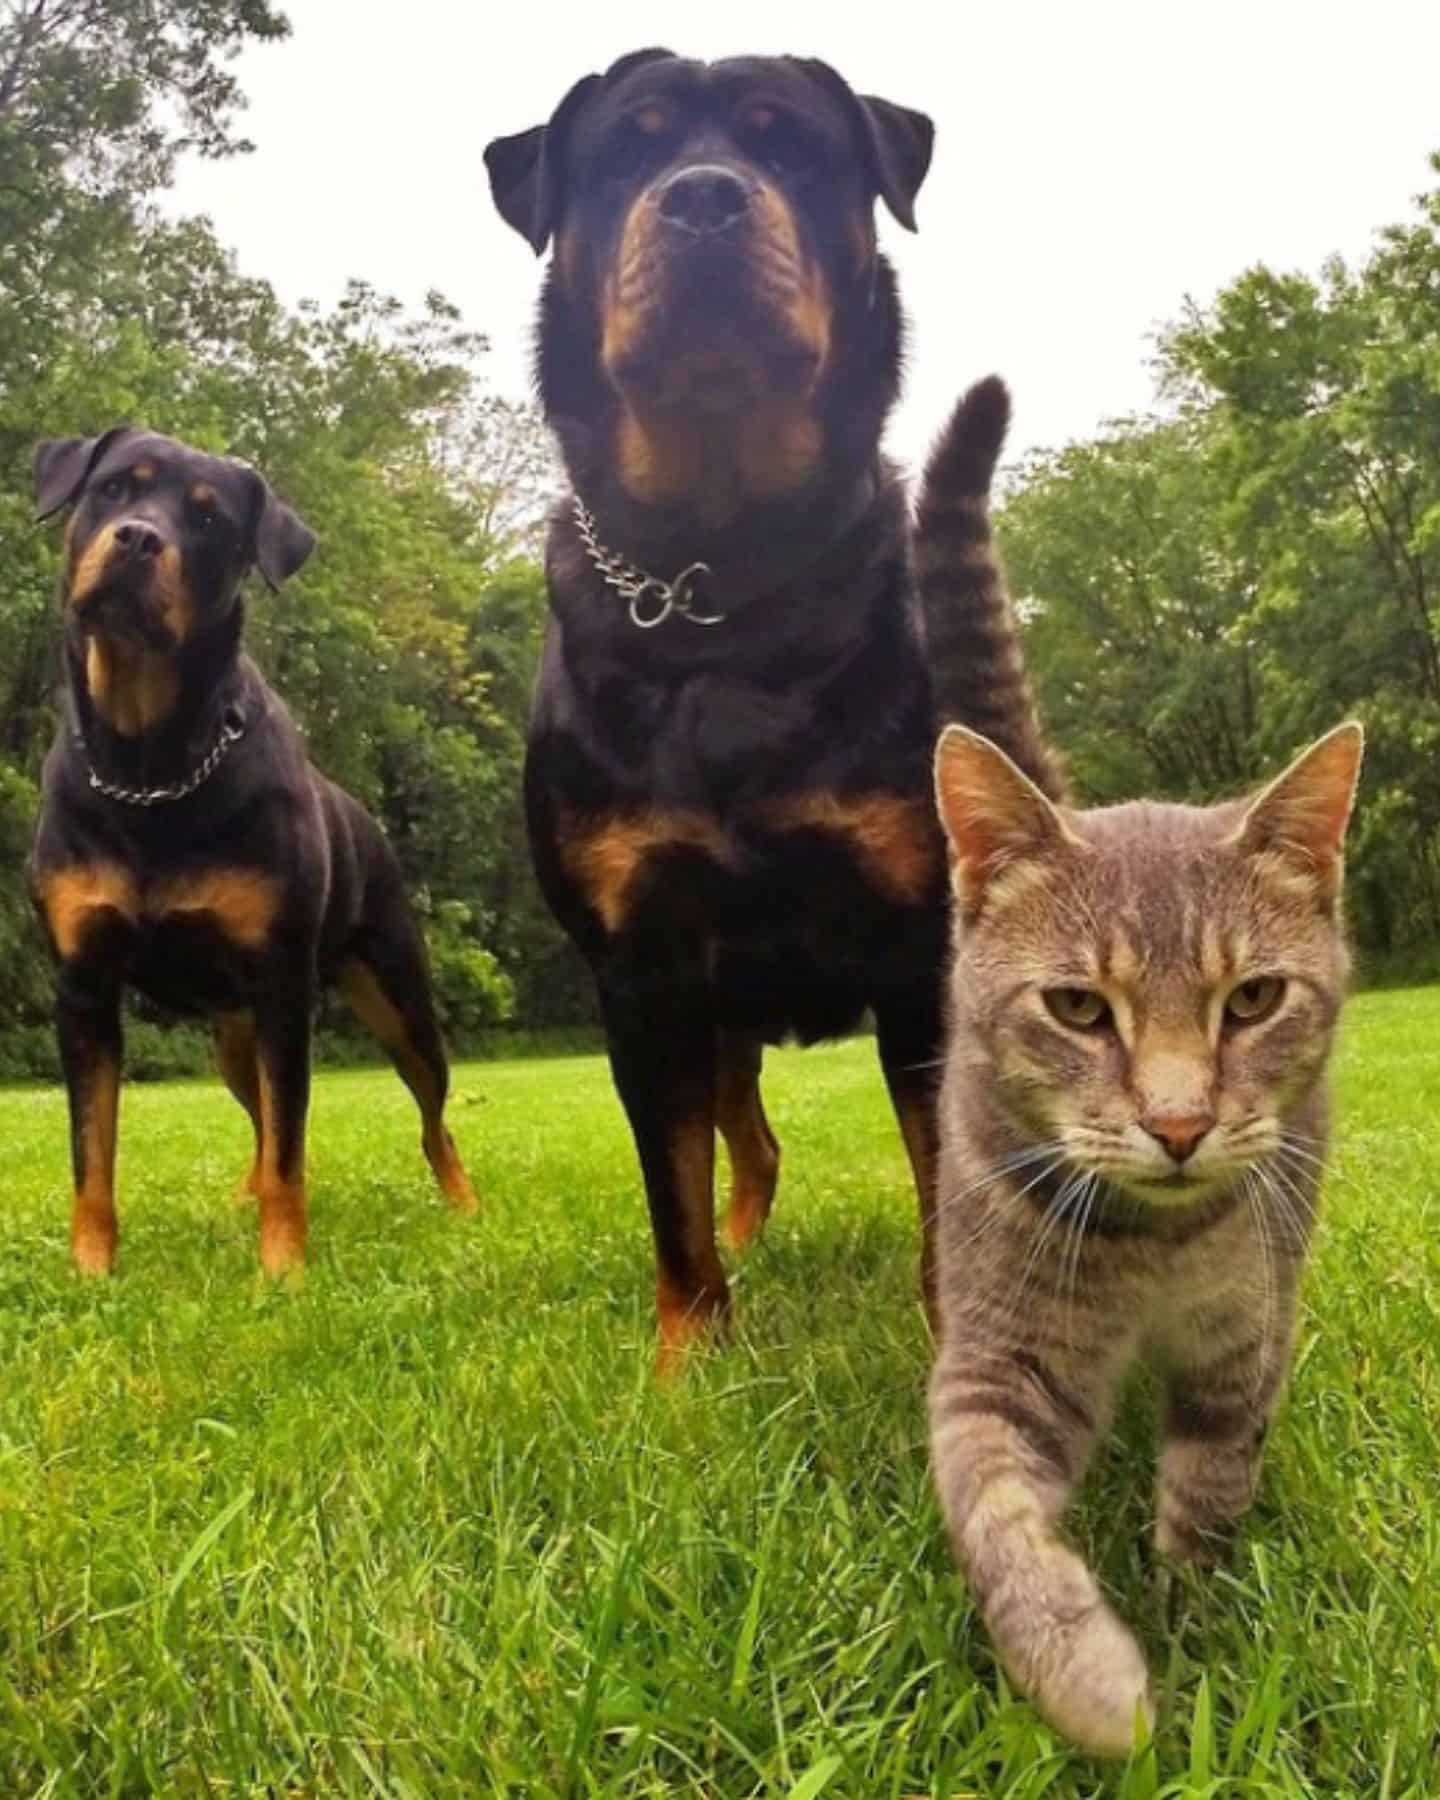 cat and two dogs on grass